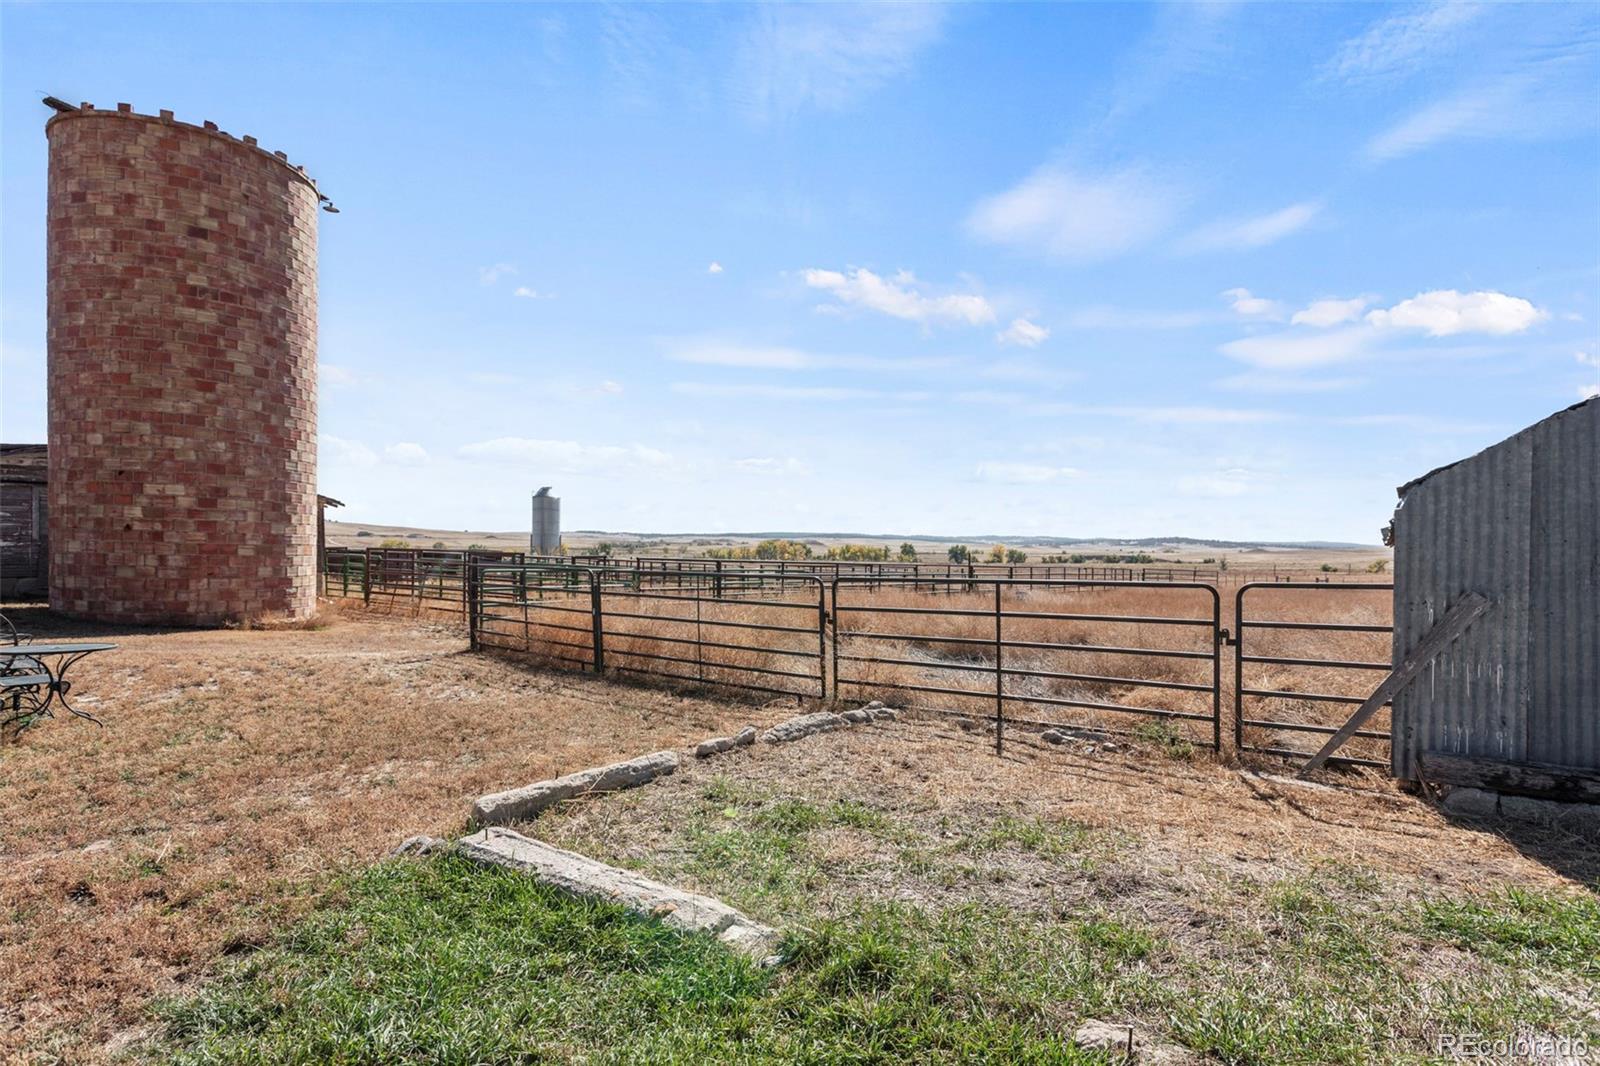 17272 County Road 112, Calhan, CO